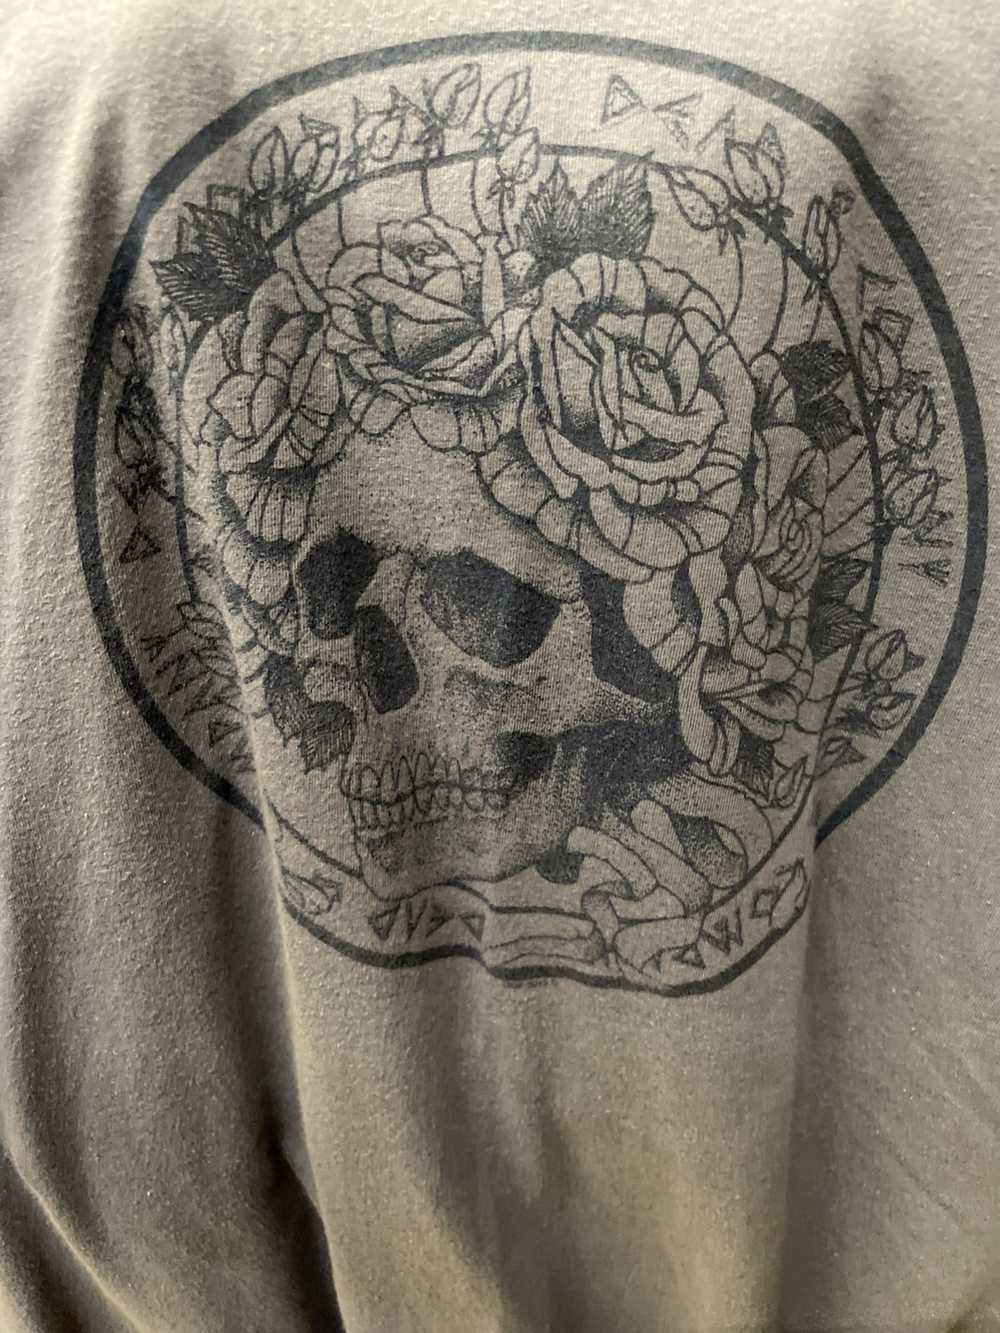 Band Tees Dead and Company 11.7.15 NYC - image 2